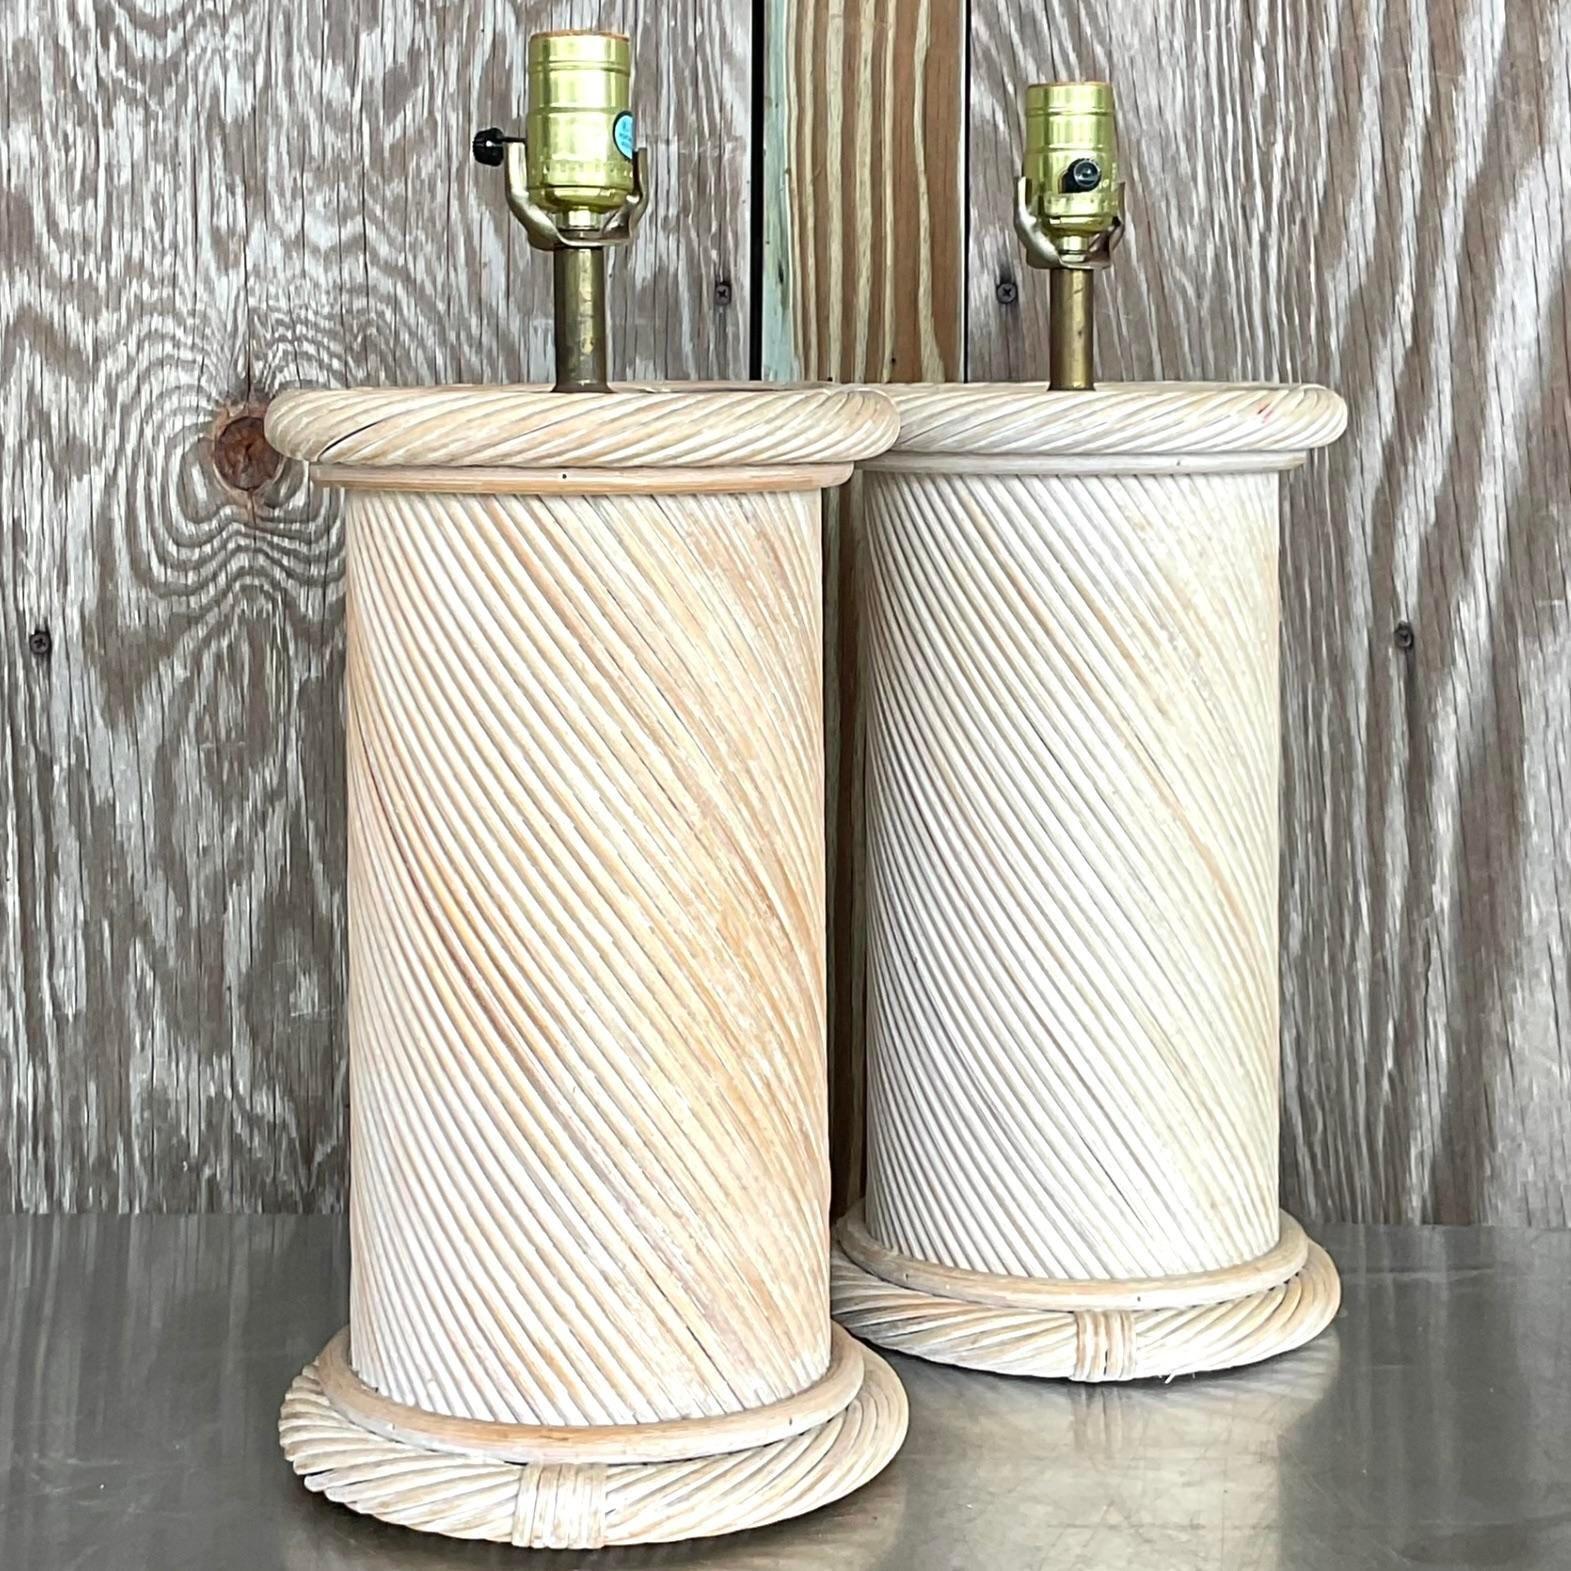 Philippine Vintage Coastal Swirl Pencil Reed Lamps - a Pair For Sale